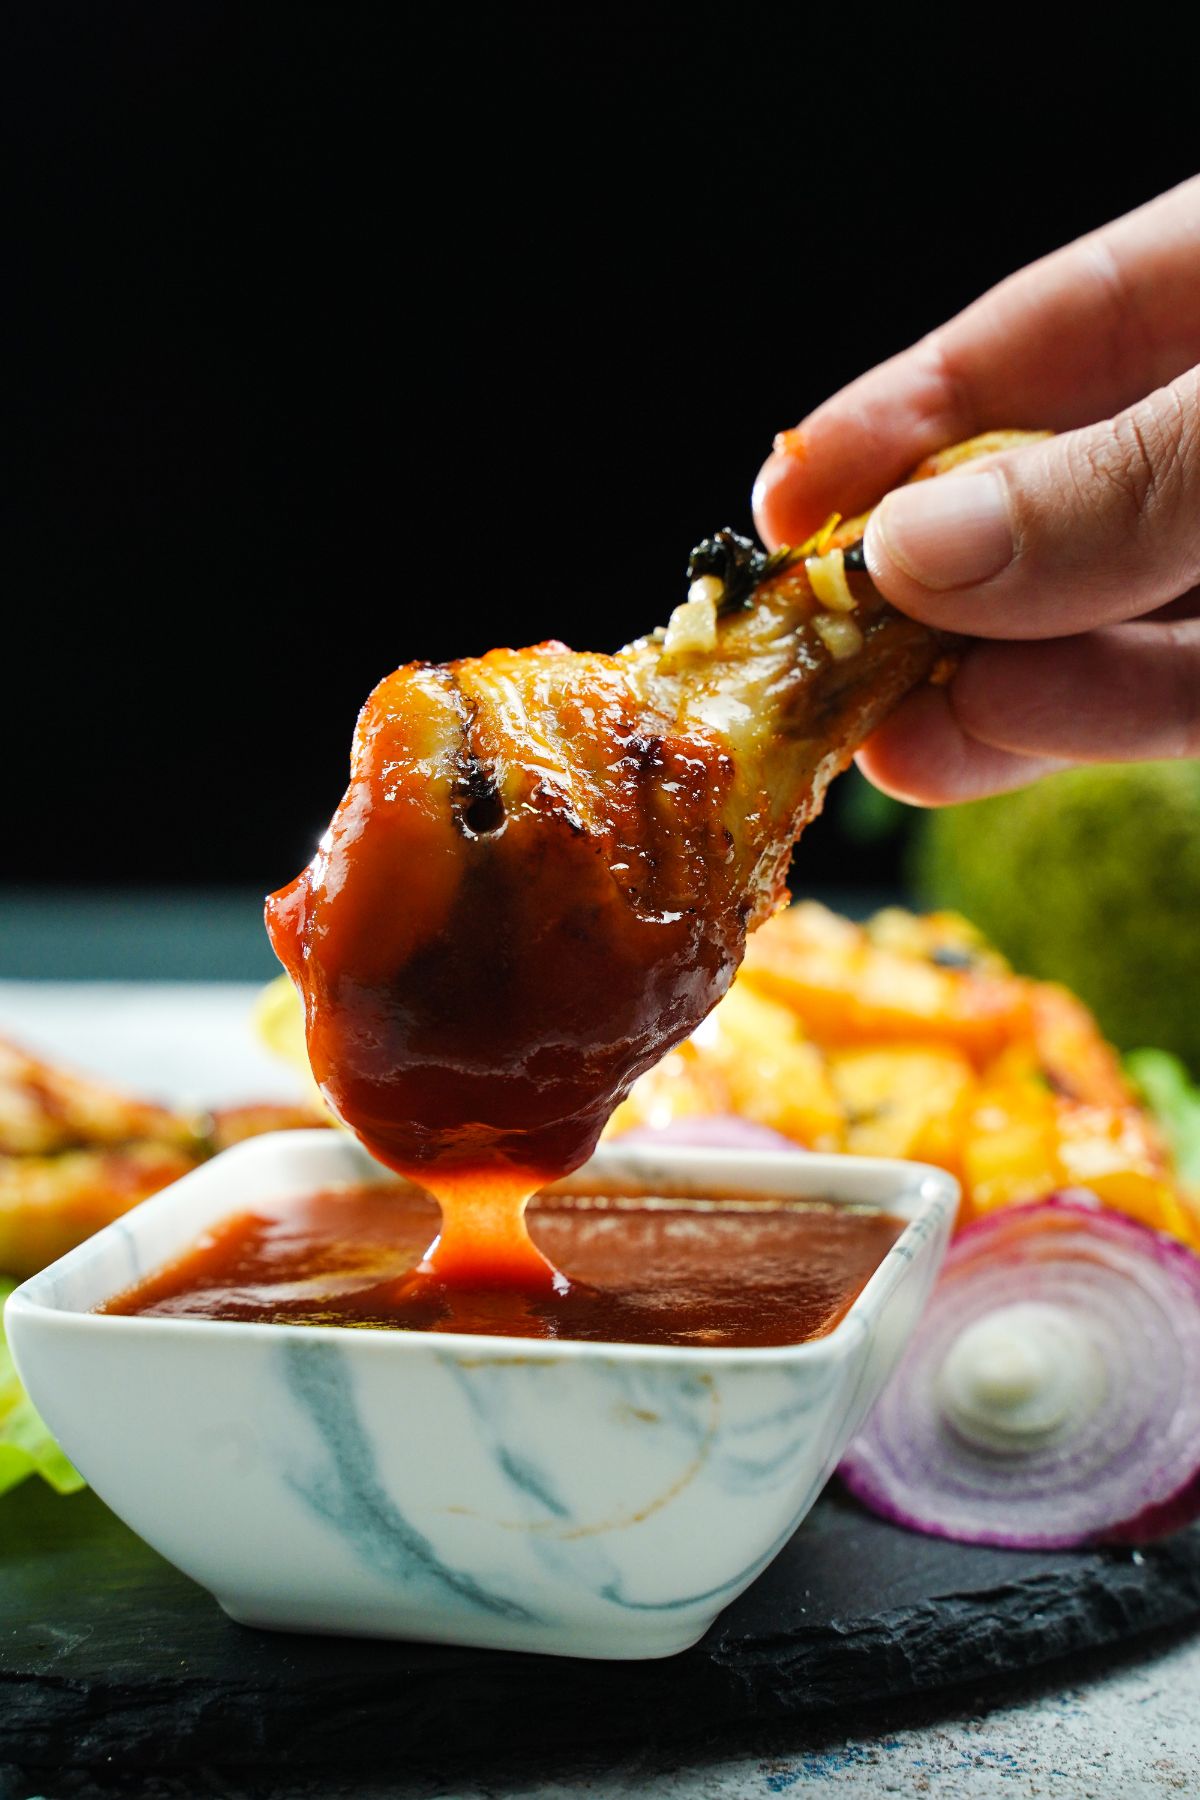 hand dipping chicken leg into sauce by black plate